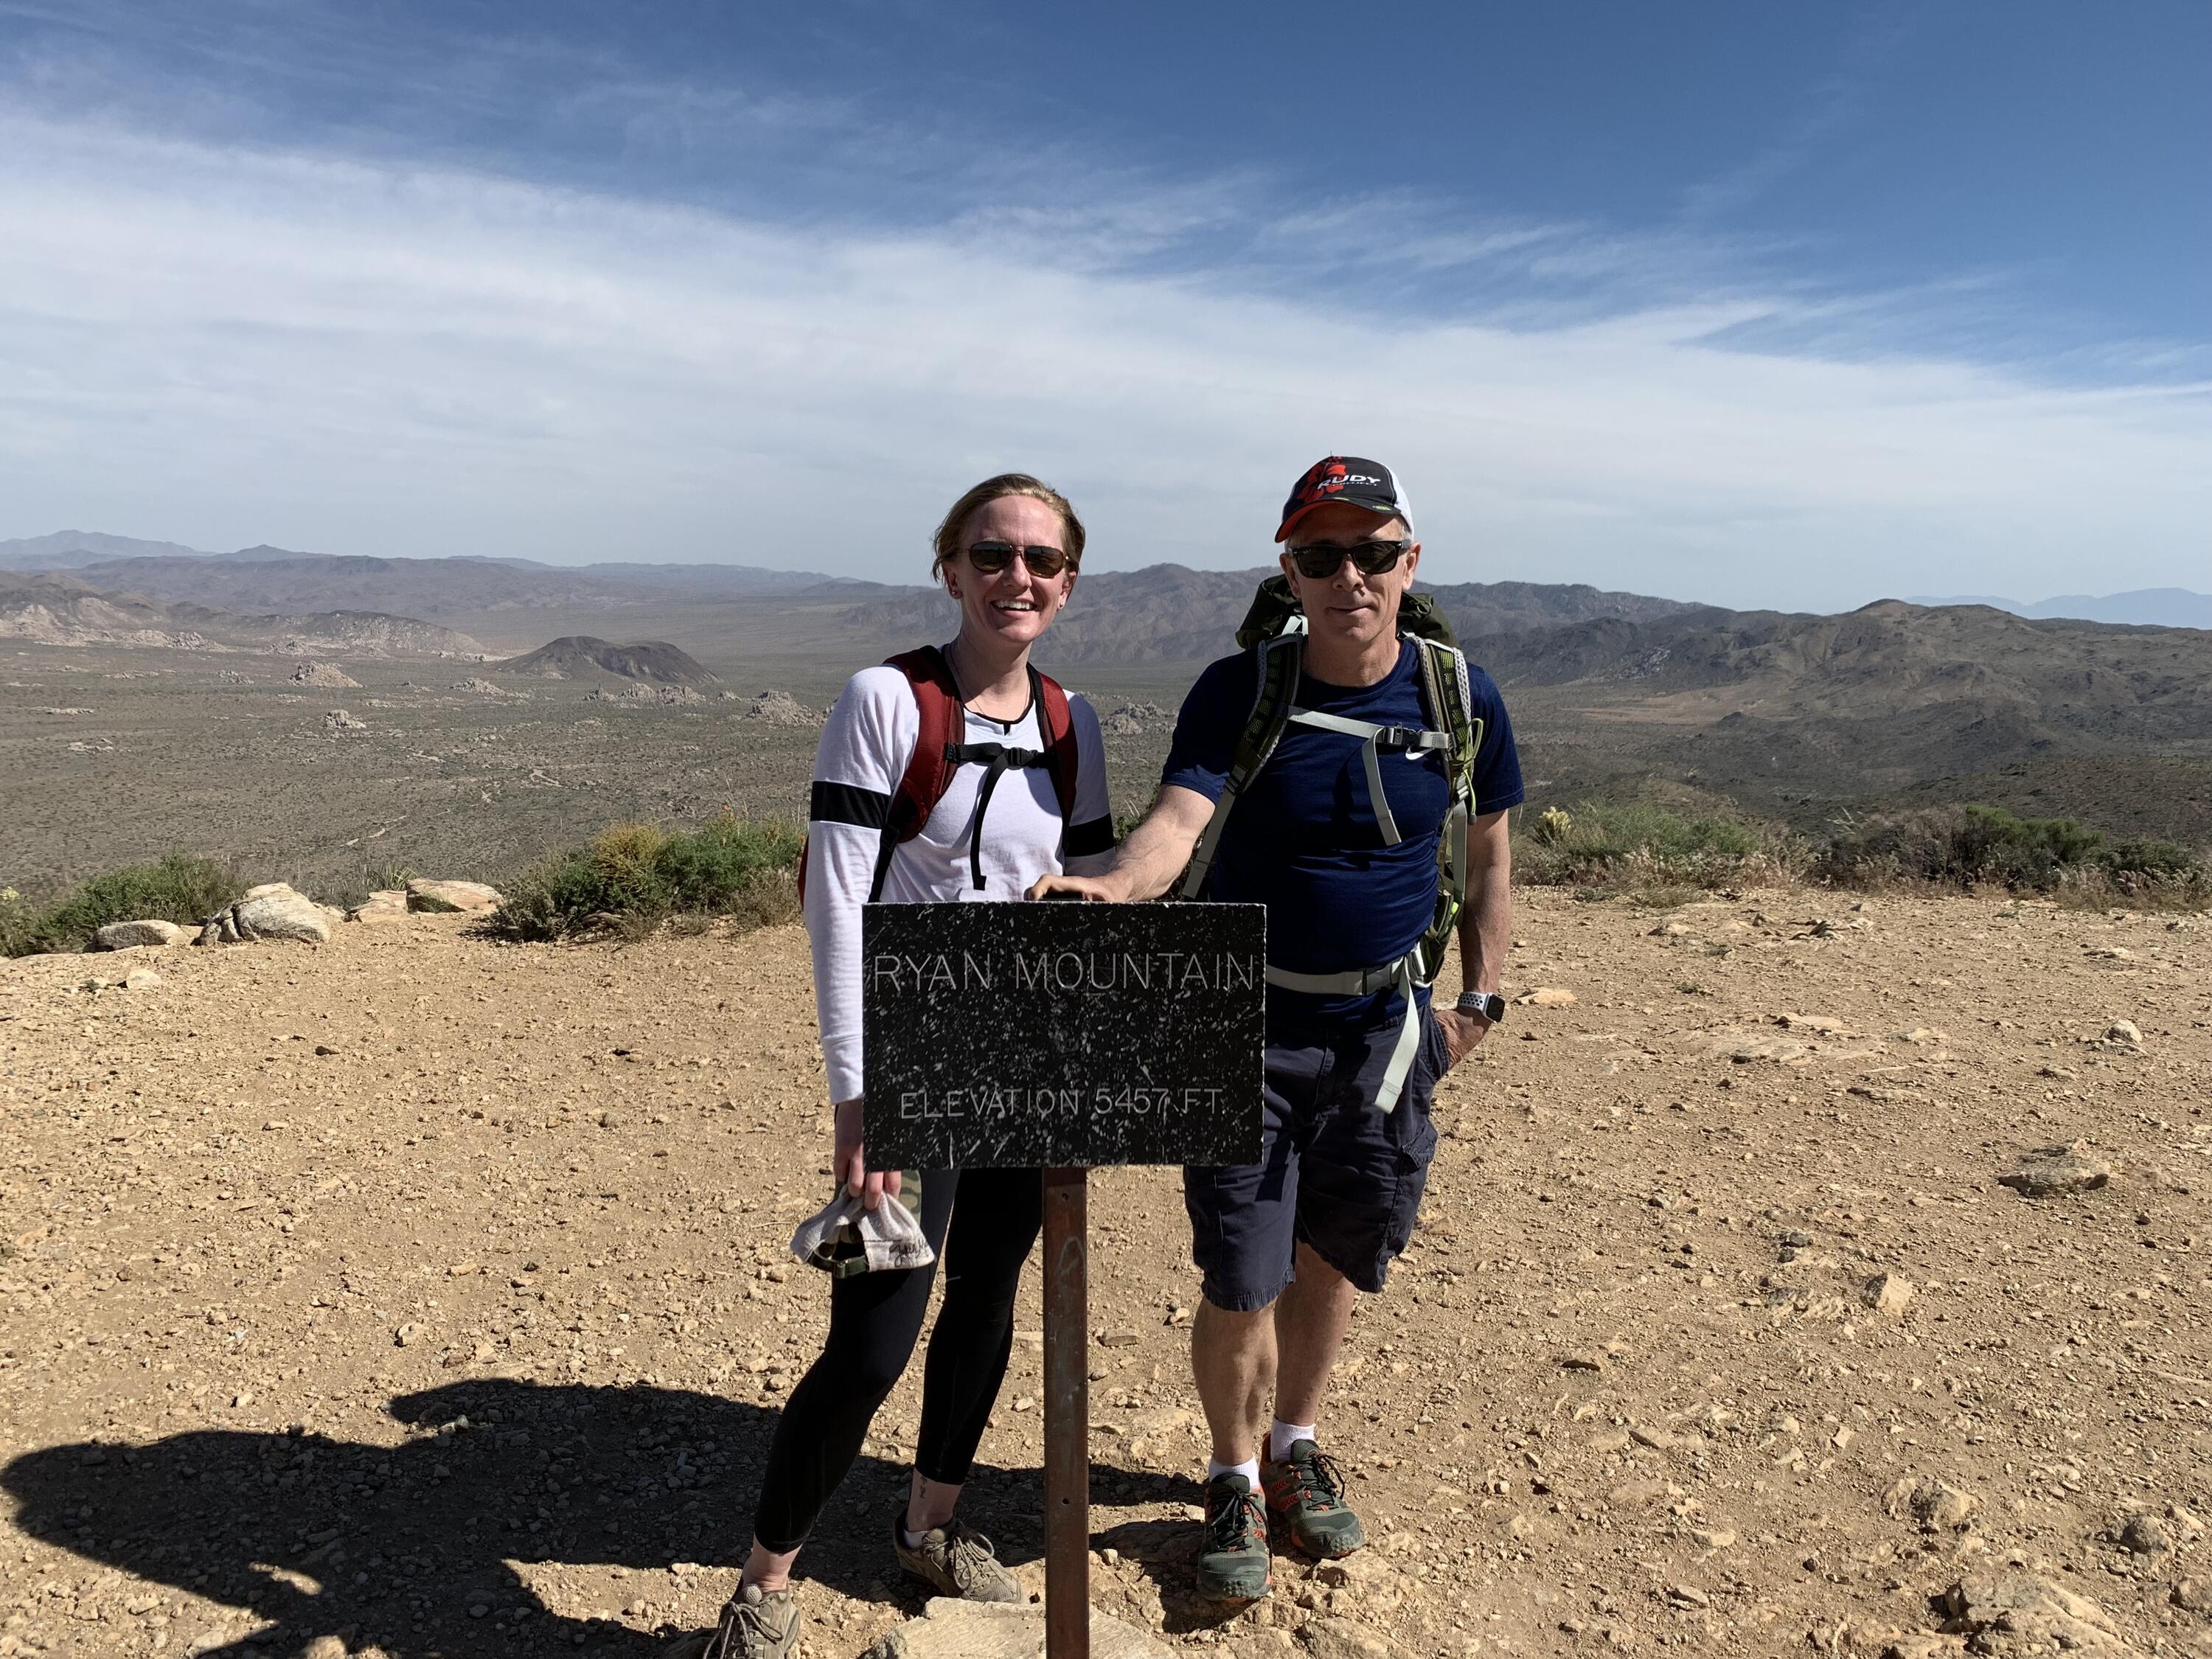 Michael Houston and Meaghan Middleton at the summit of a mountain